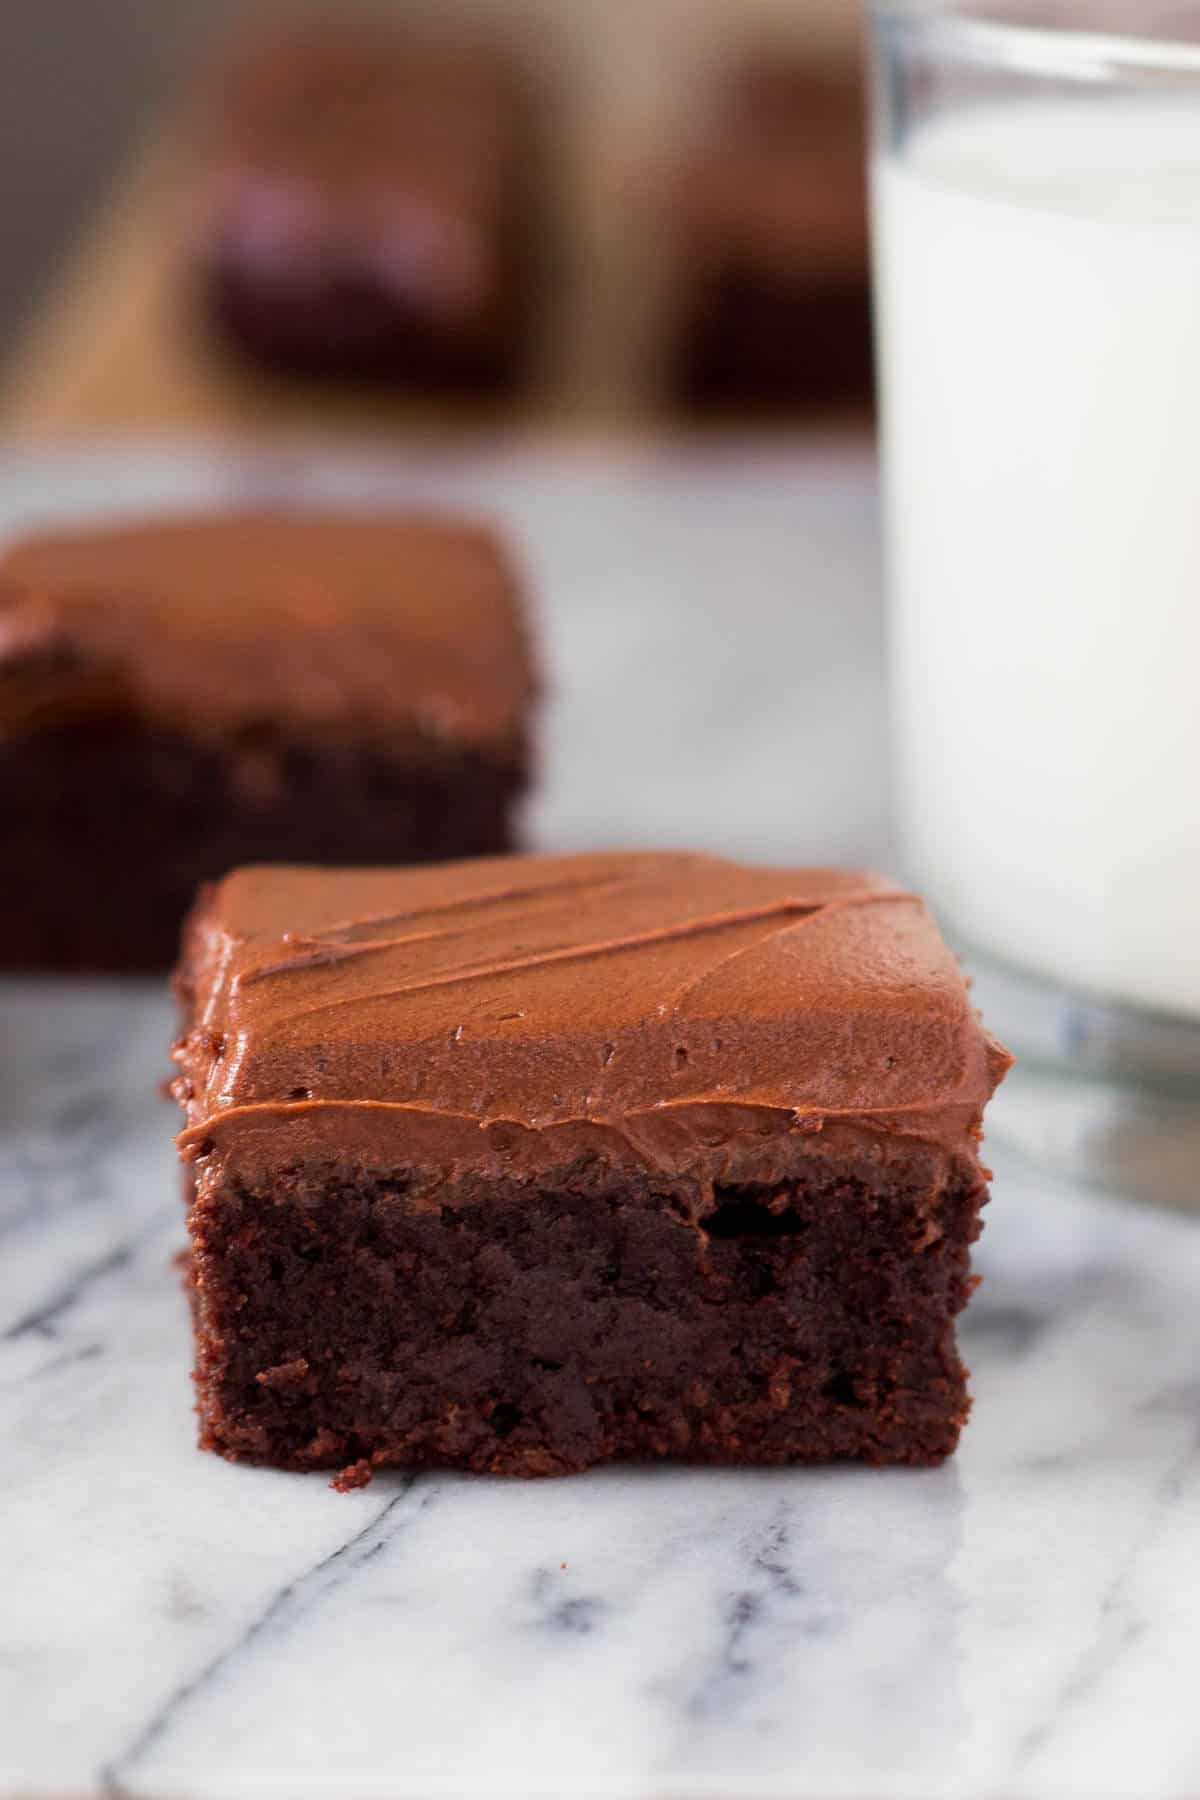 So fudgy, so delicious & slathered with a thick layer of cream cheese chocolate frosting - you NEED to make these brownies!